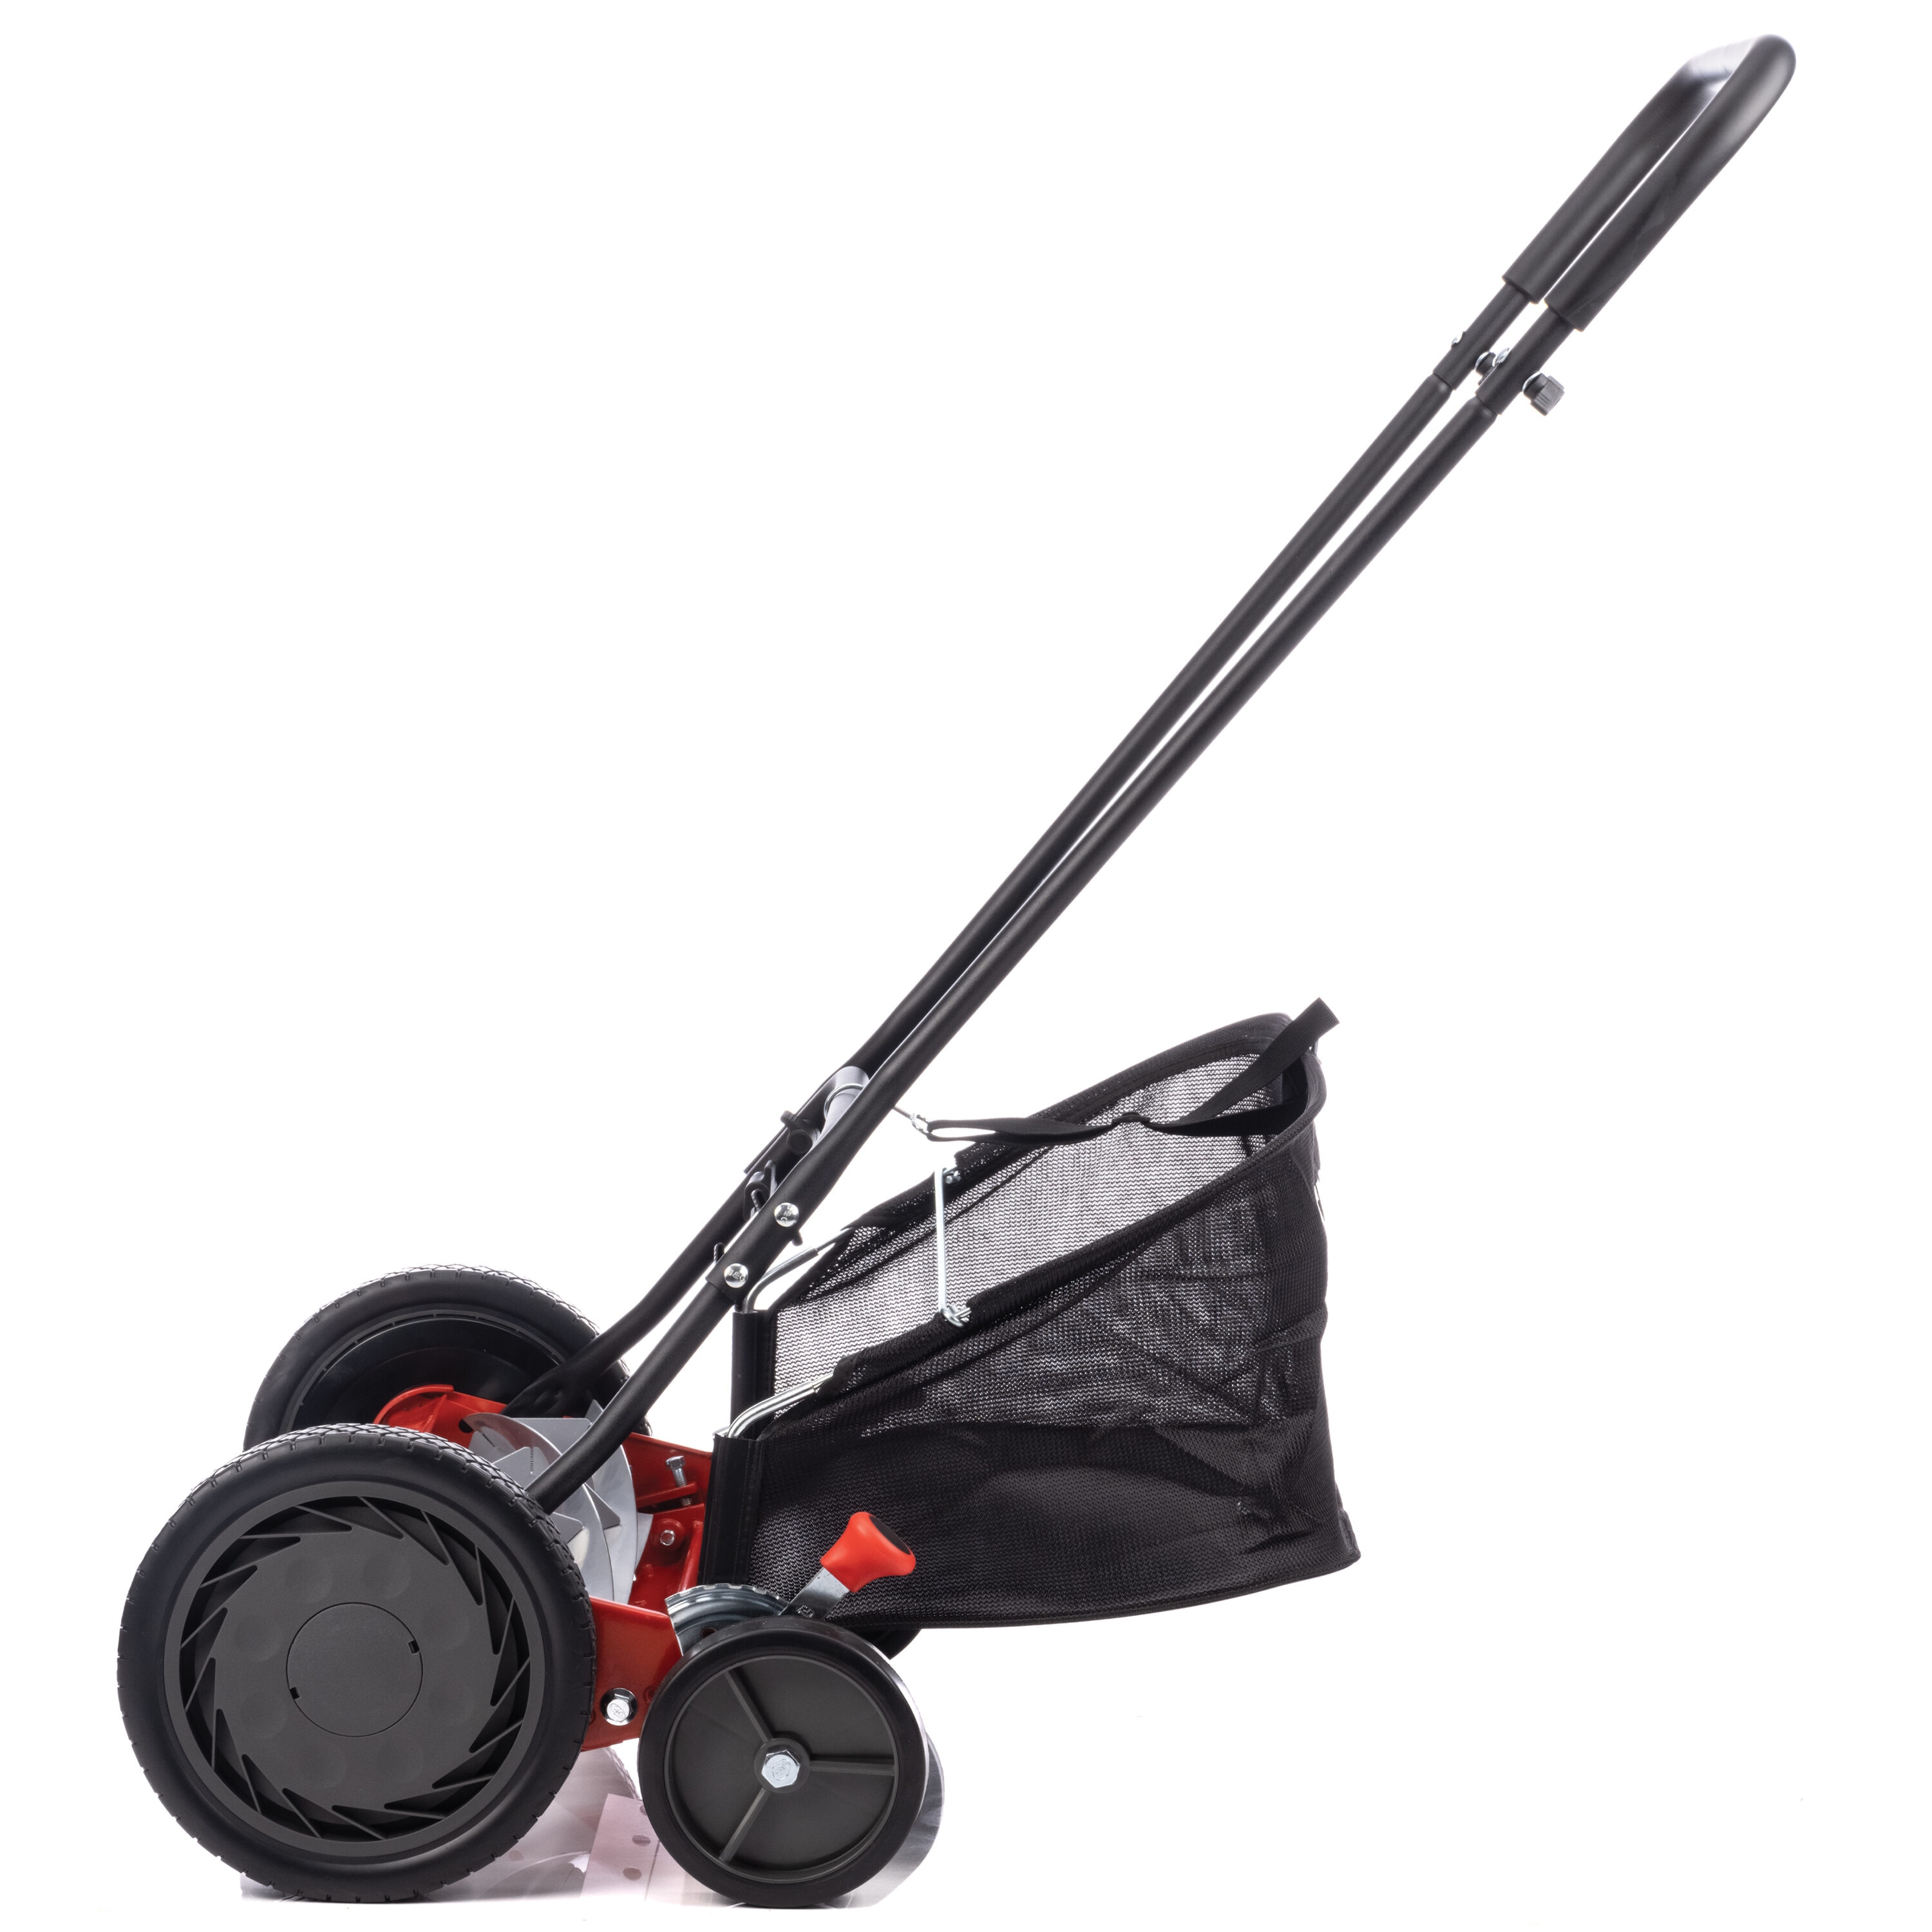 CRAFTSMAN 18-Inch 5-Blade Reel Lawn Mower with Bagger, Adjustable Cutting  Height, Lightweight and Eco-Friendly in the Reel Lawn Mowers department at